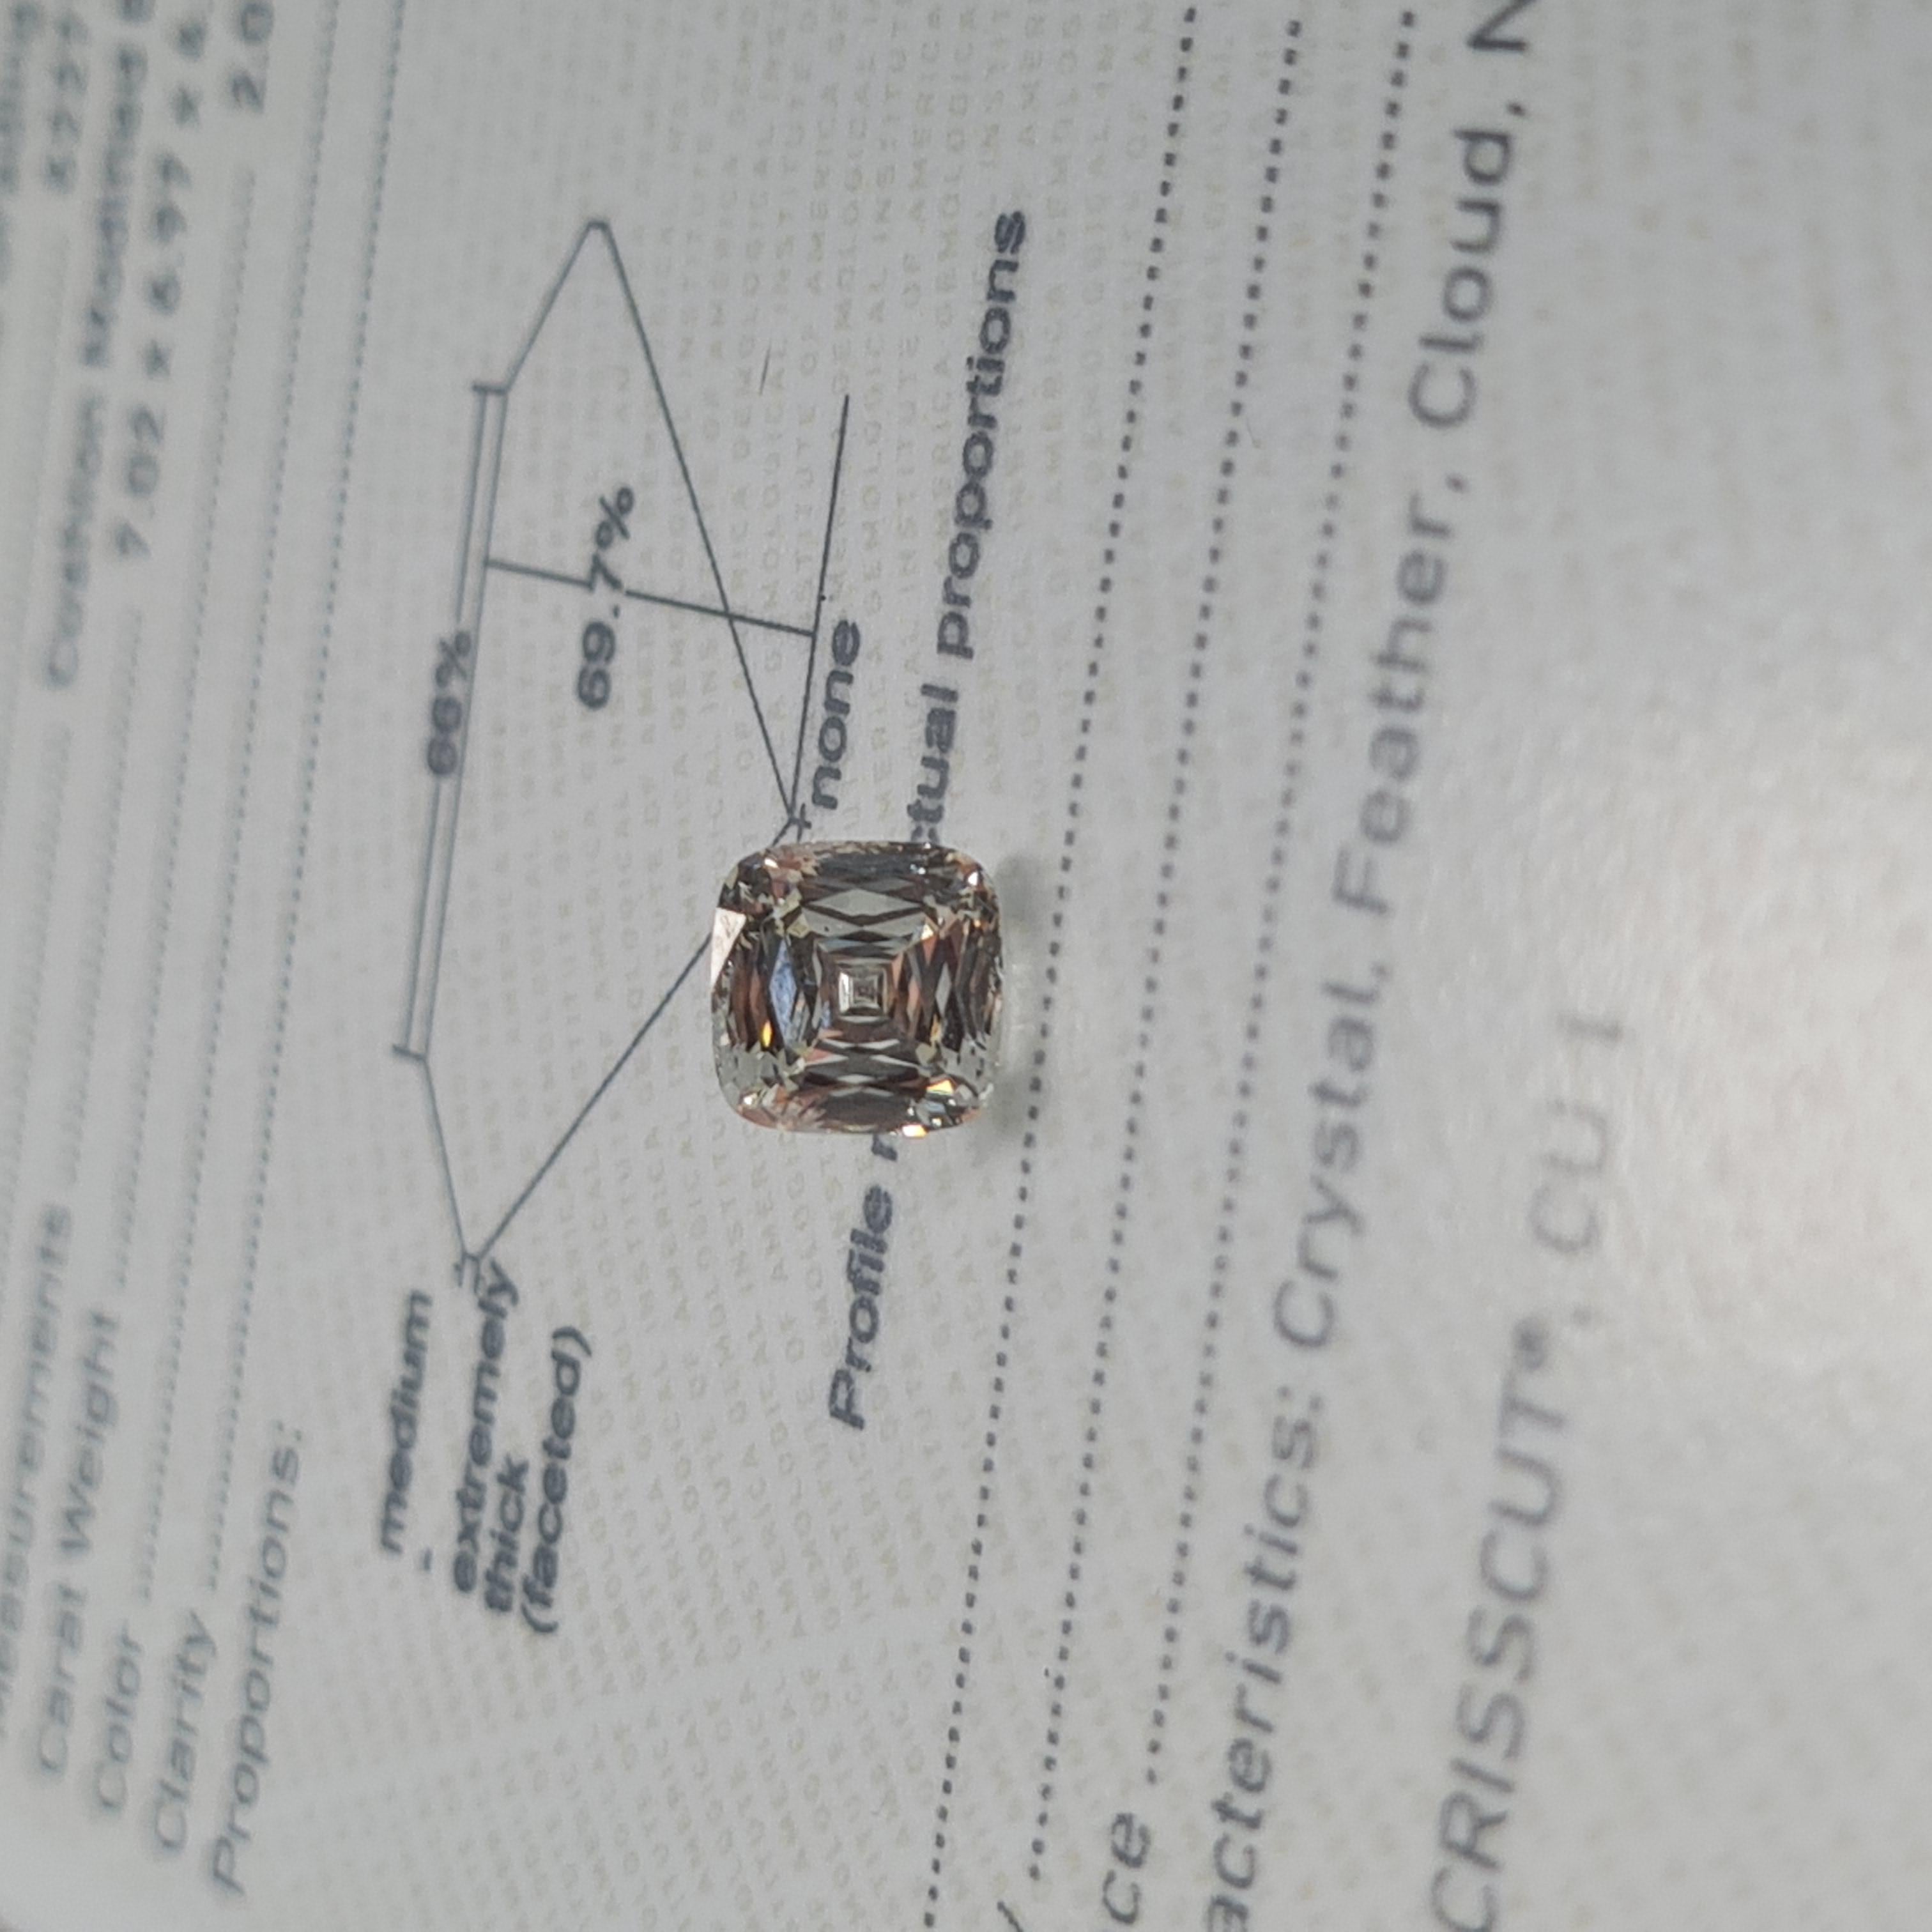 This is a rare unique Square Cushion Cut Diamond. It is faceted as a CrissCut, a luxury diamond cutter. This stone from CrissCut sold for 30,000. Comes with GIA certificate. I acquired this stone as a trade-in. Stone comes loose. I AM SELLING AT A